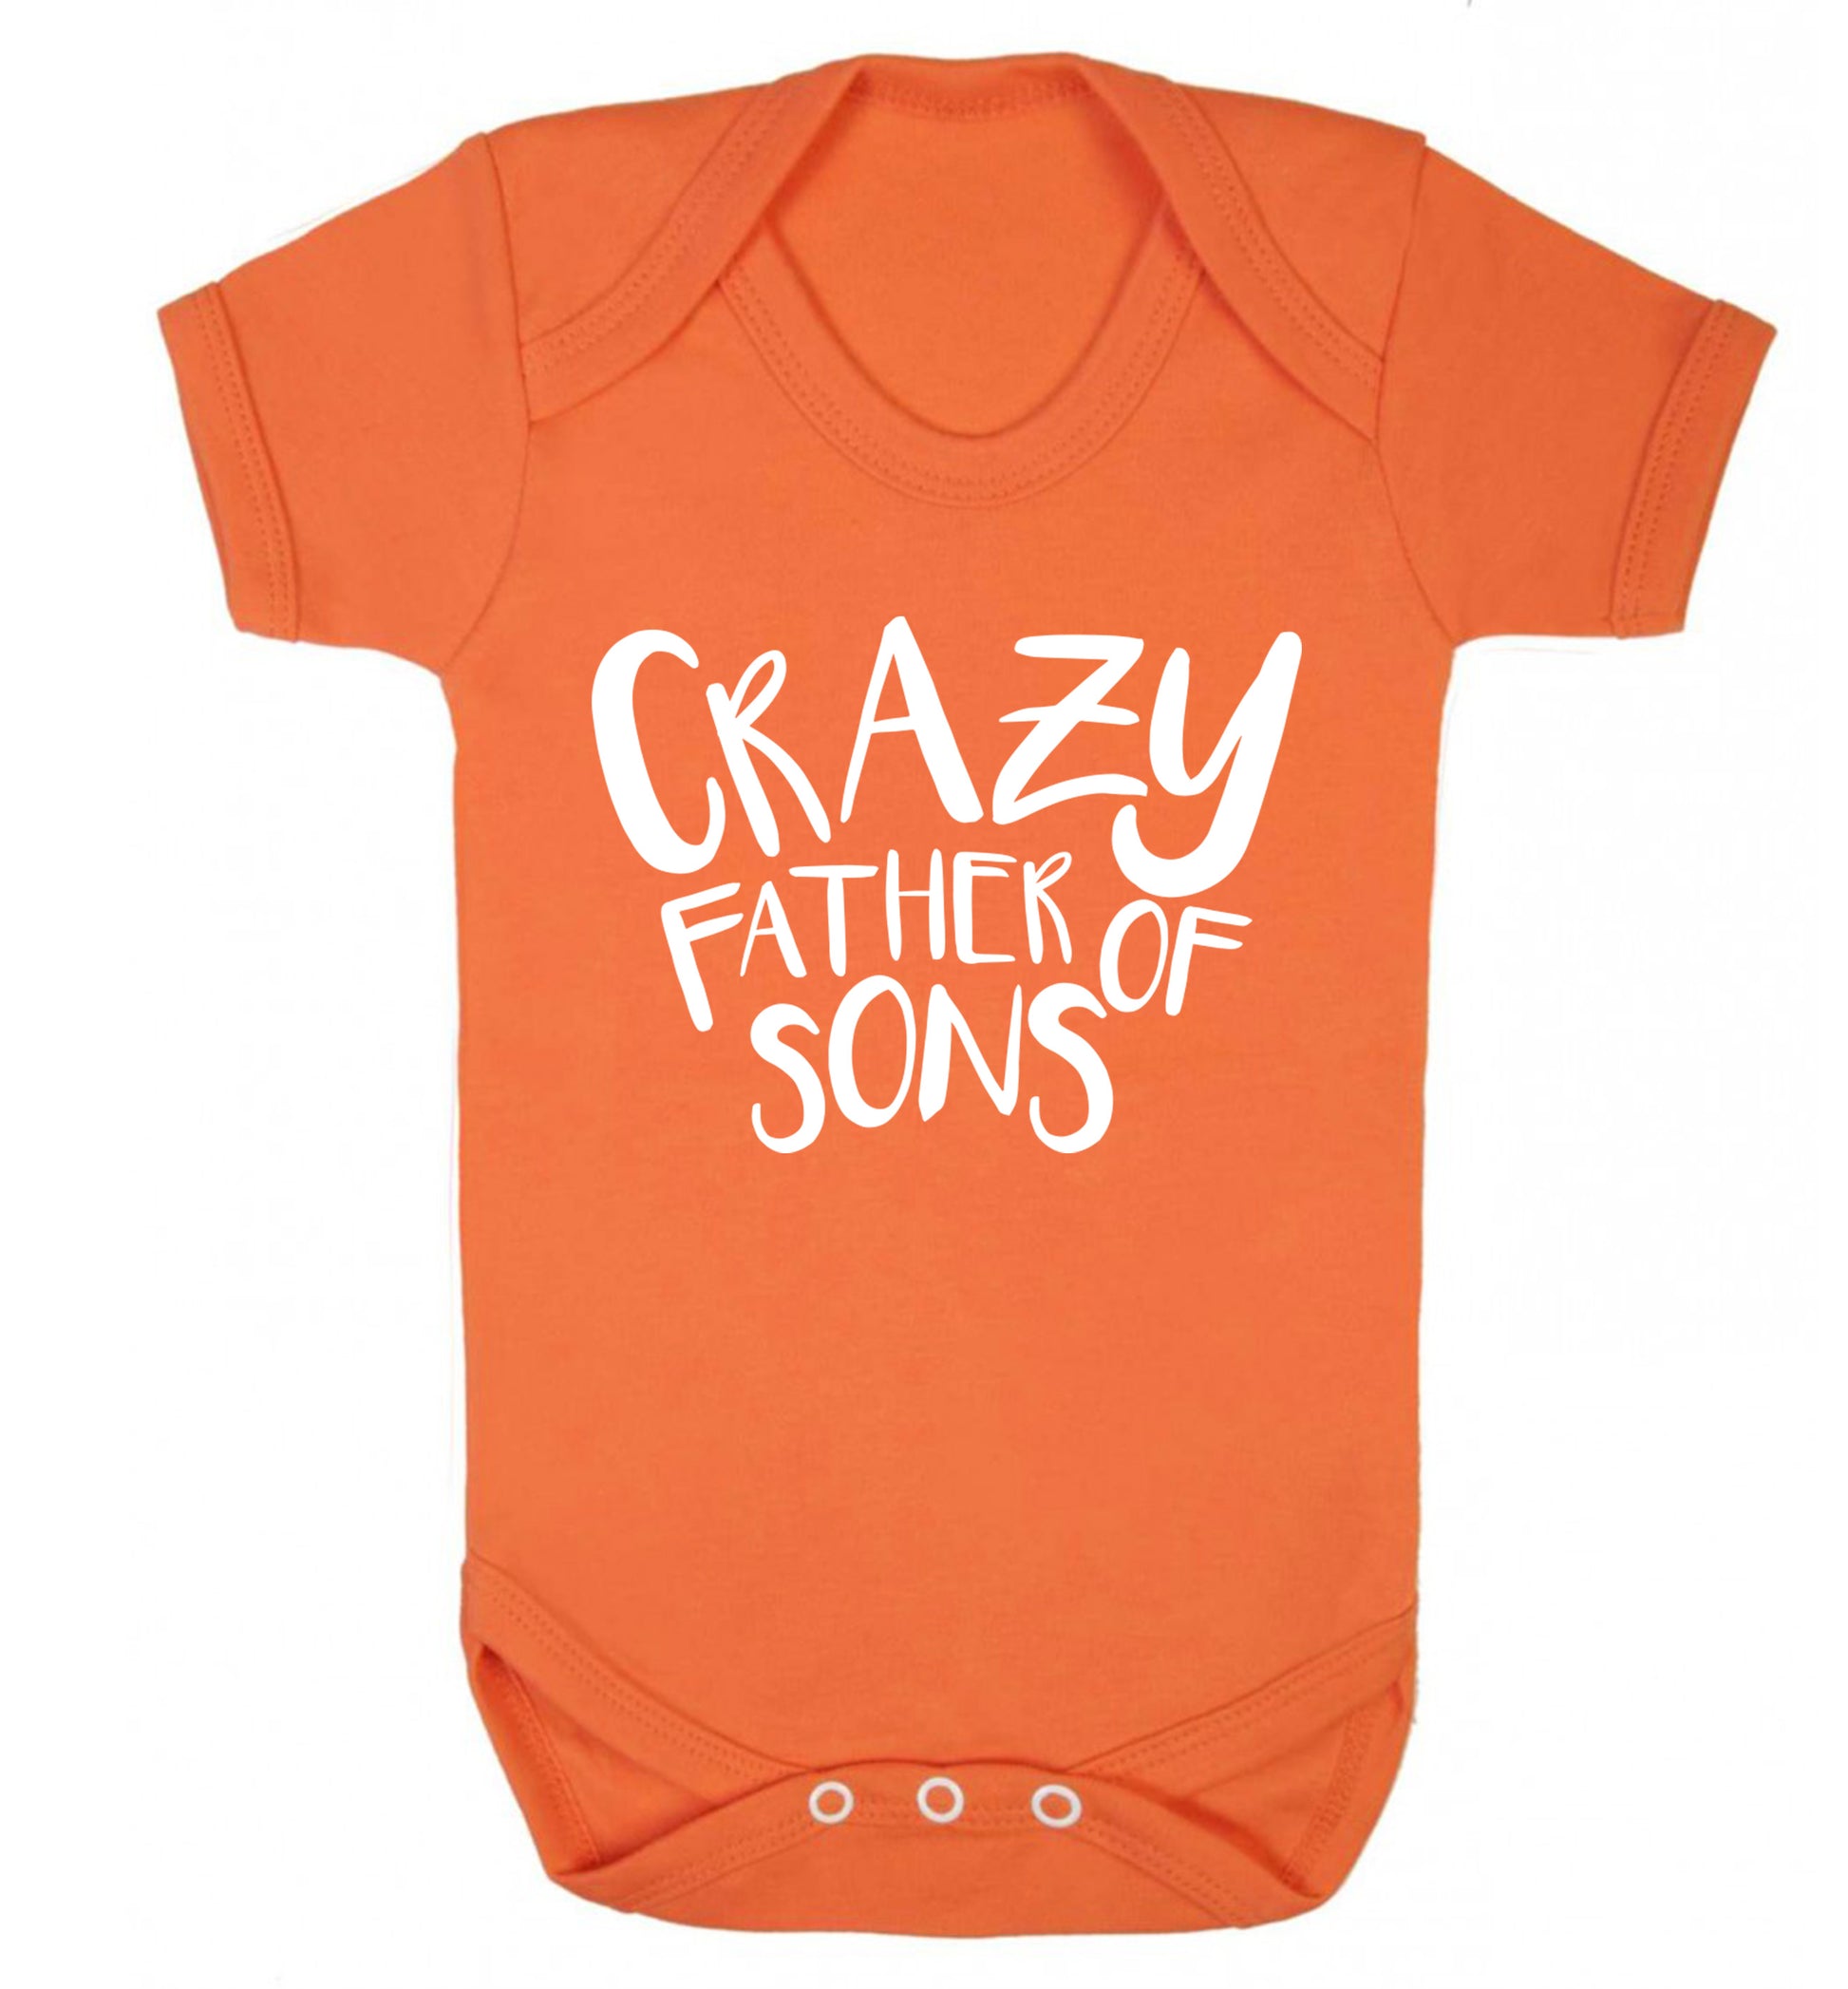 Crazy father of sons Baby Vest orange 18-24 months